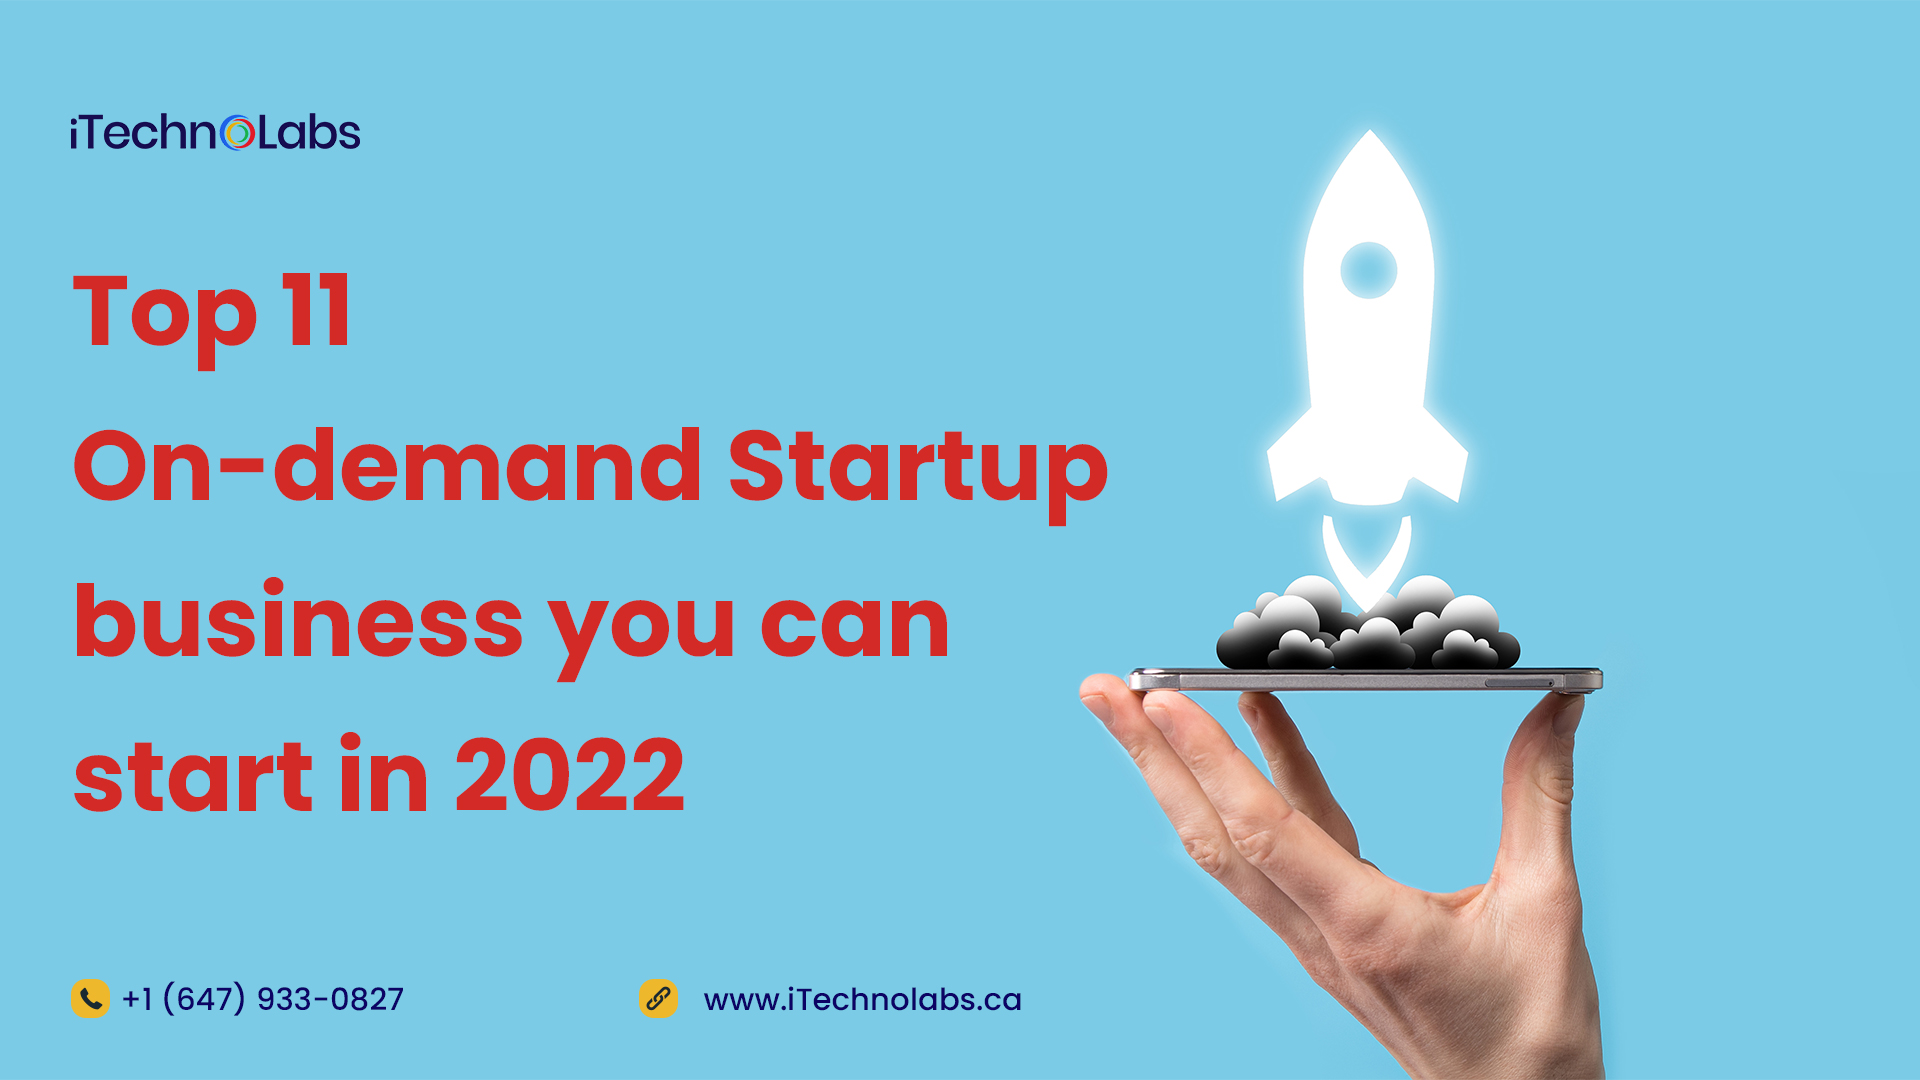 Top-11-On-demand-Startup-business-you-can-start-in-2022-itechnolabs.jpg